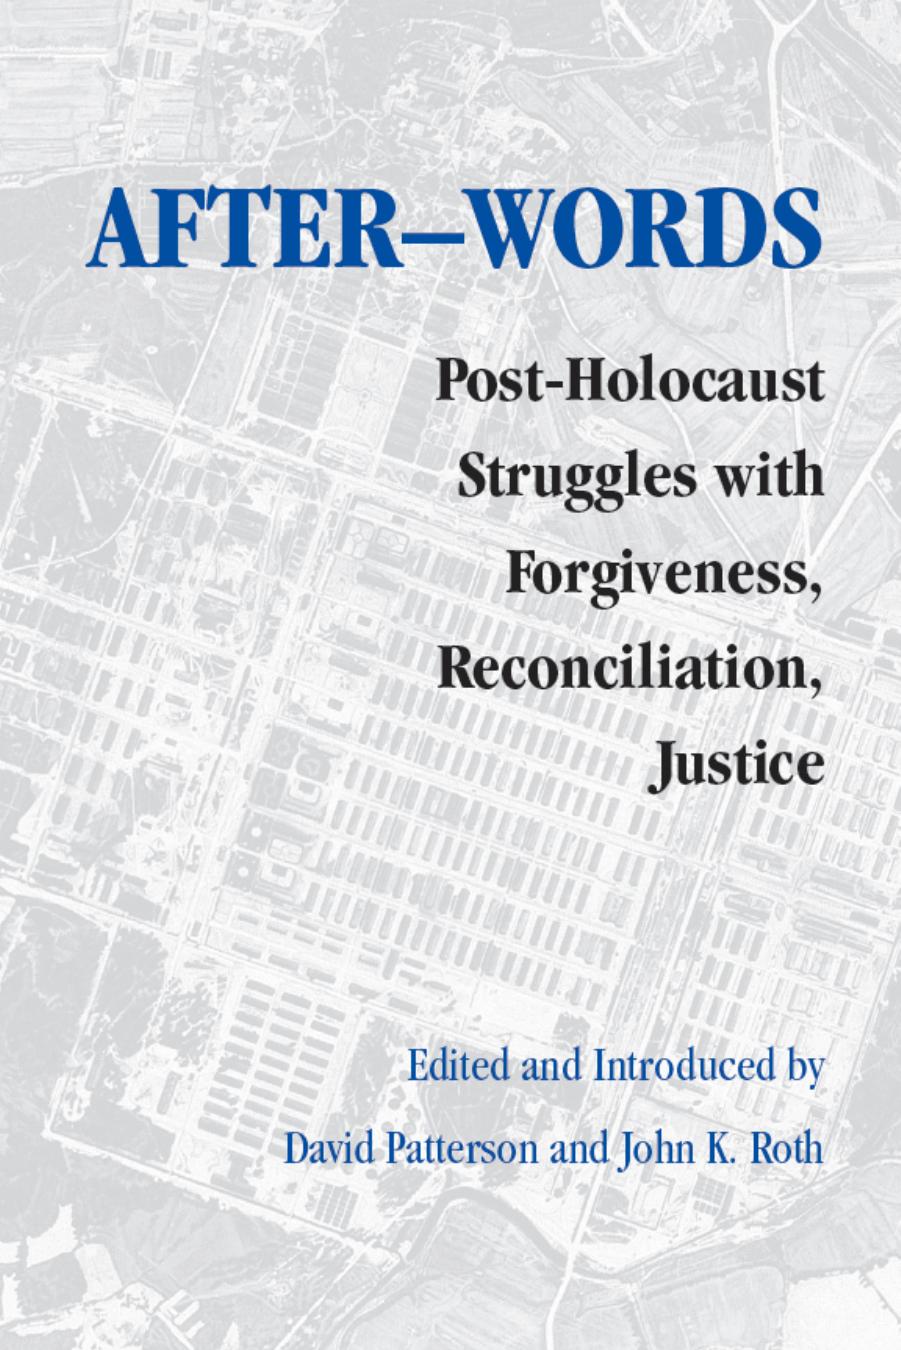 After-words : Post-Holocaust Struggles with Forgiveness, Reconciliation, Justice by David Patterson; John K. Roth; David Patterson